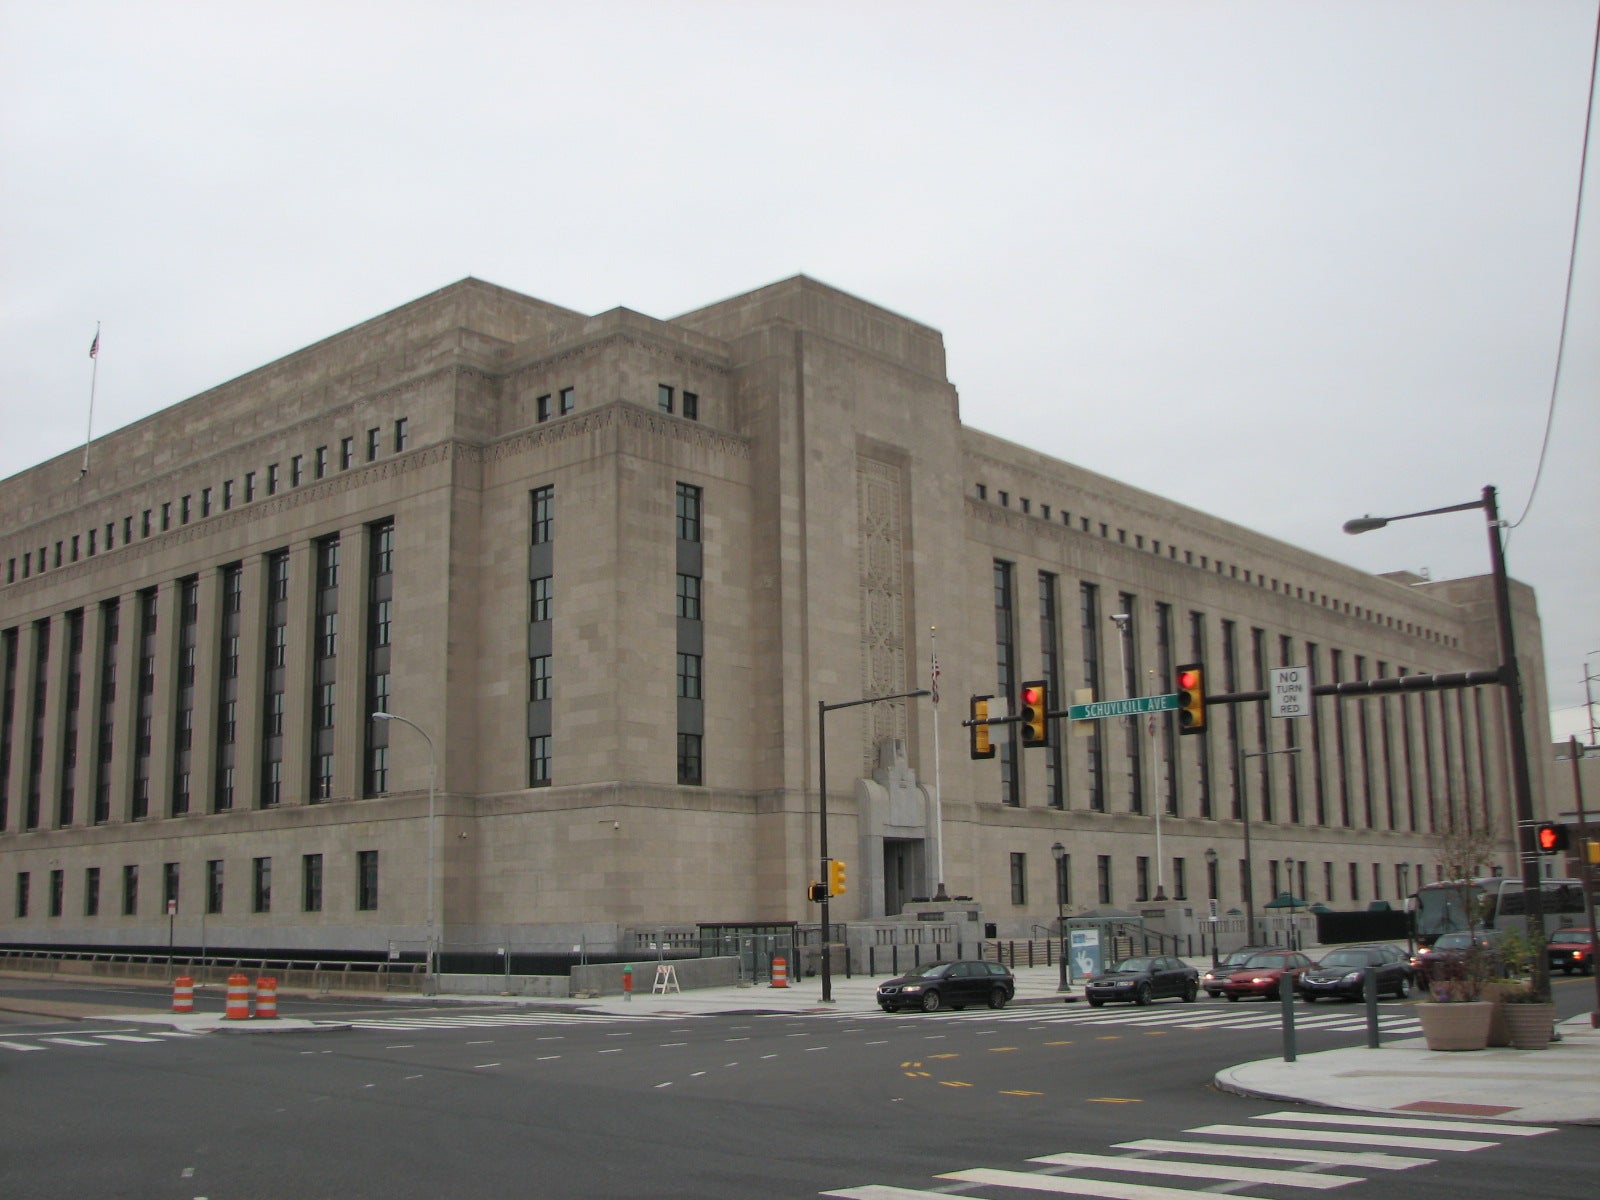 The massive Art Deco fortress now houses 5,000 employees of the IRS.